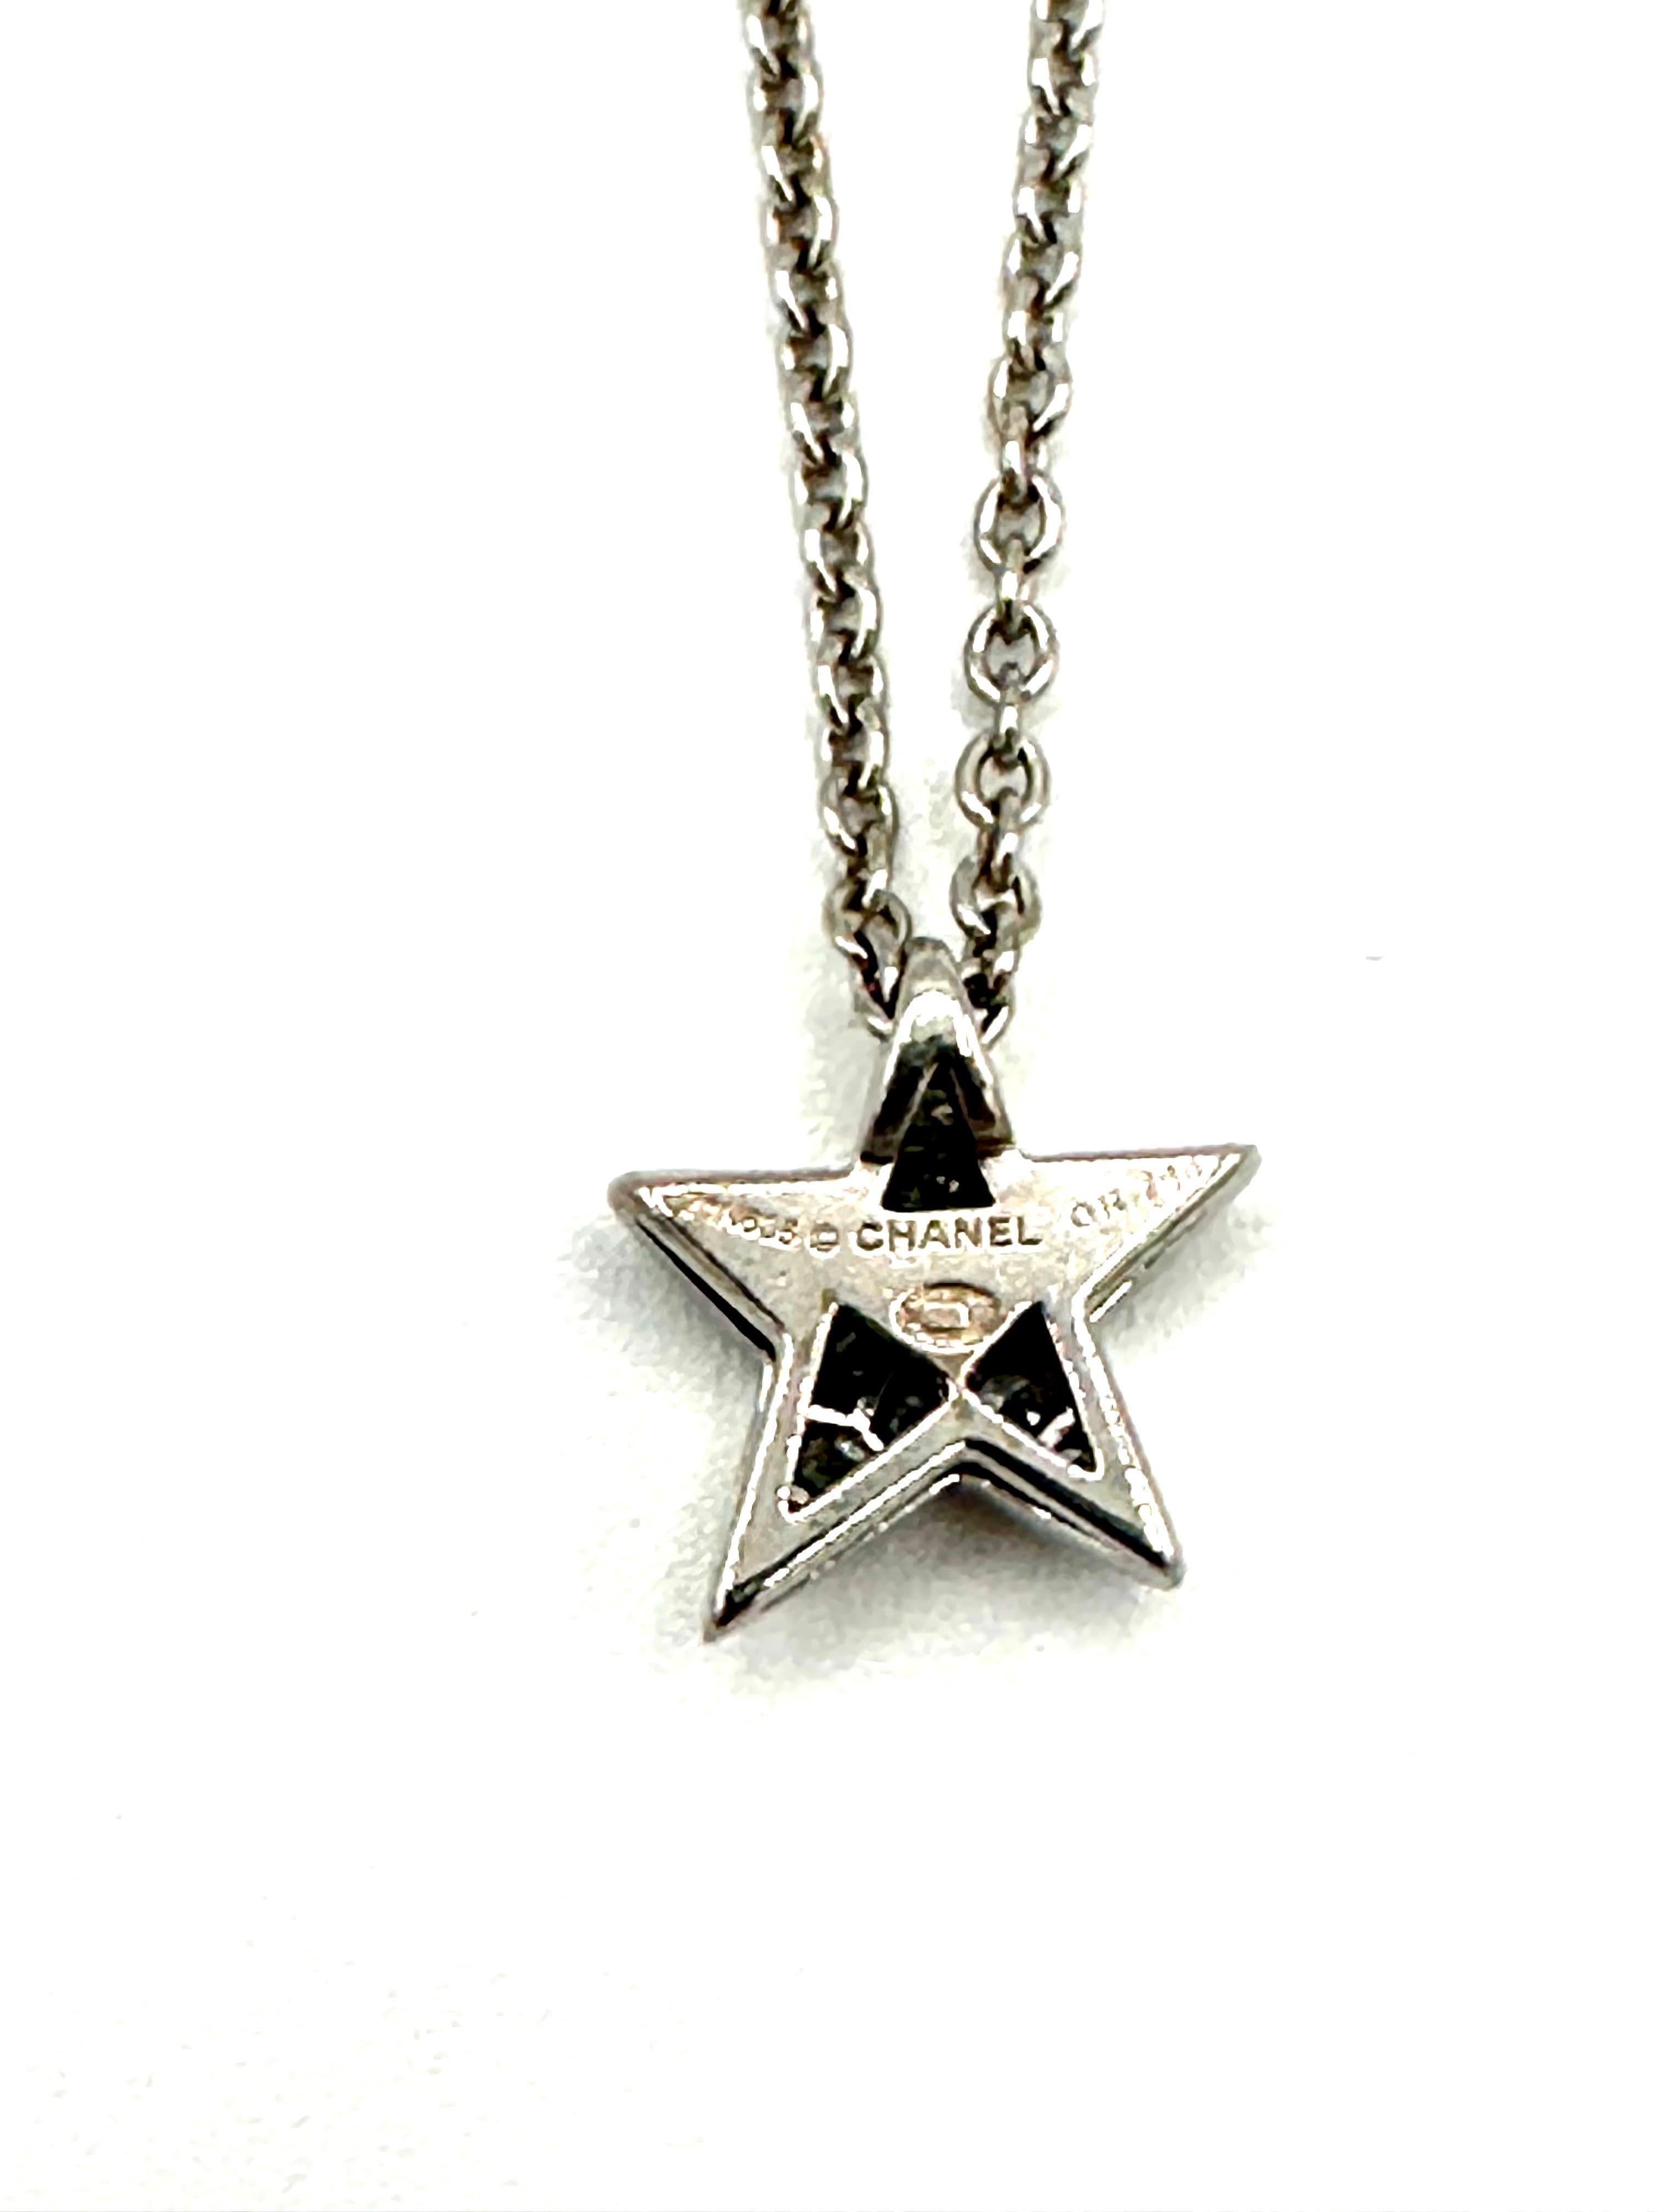 Chanel Comete Pave Diamond Star and 18K White Gold Pendant Necklace  In Excellent Condition For Sale In Chevy Chase, MD